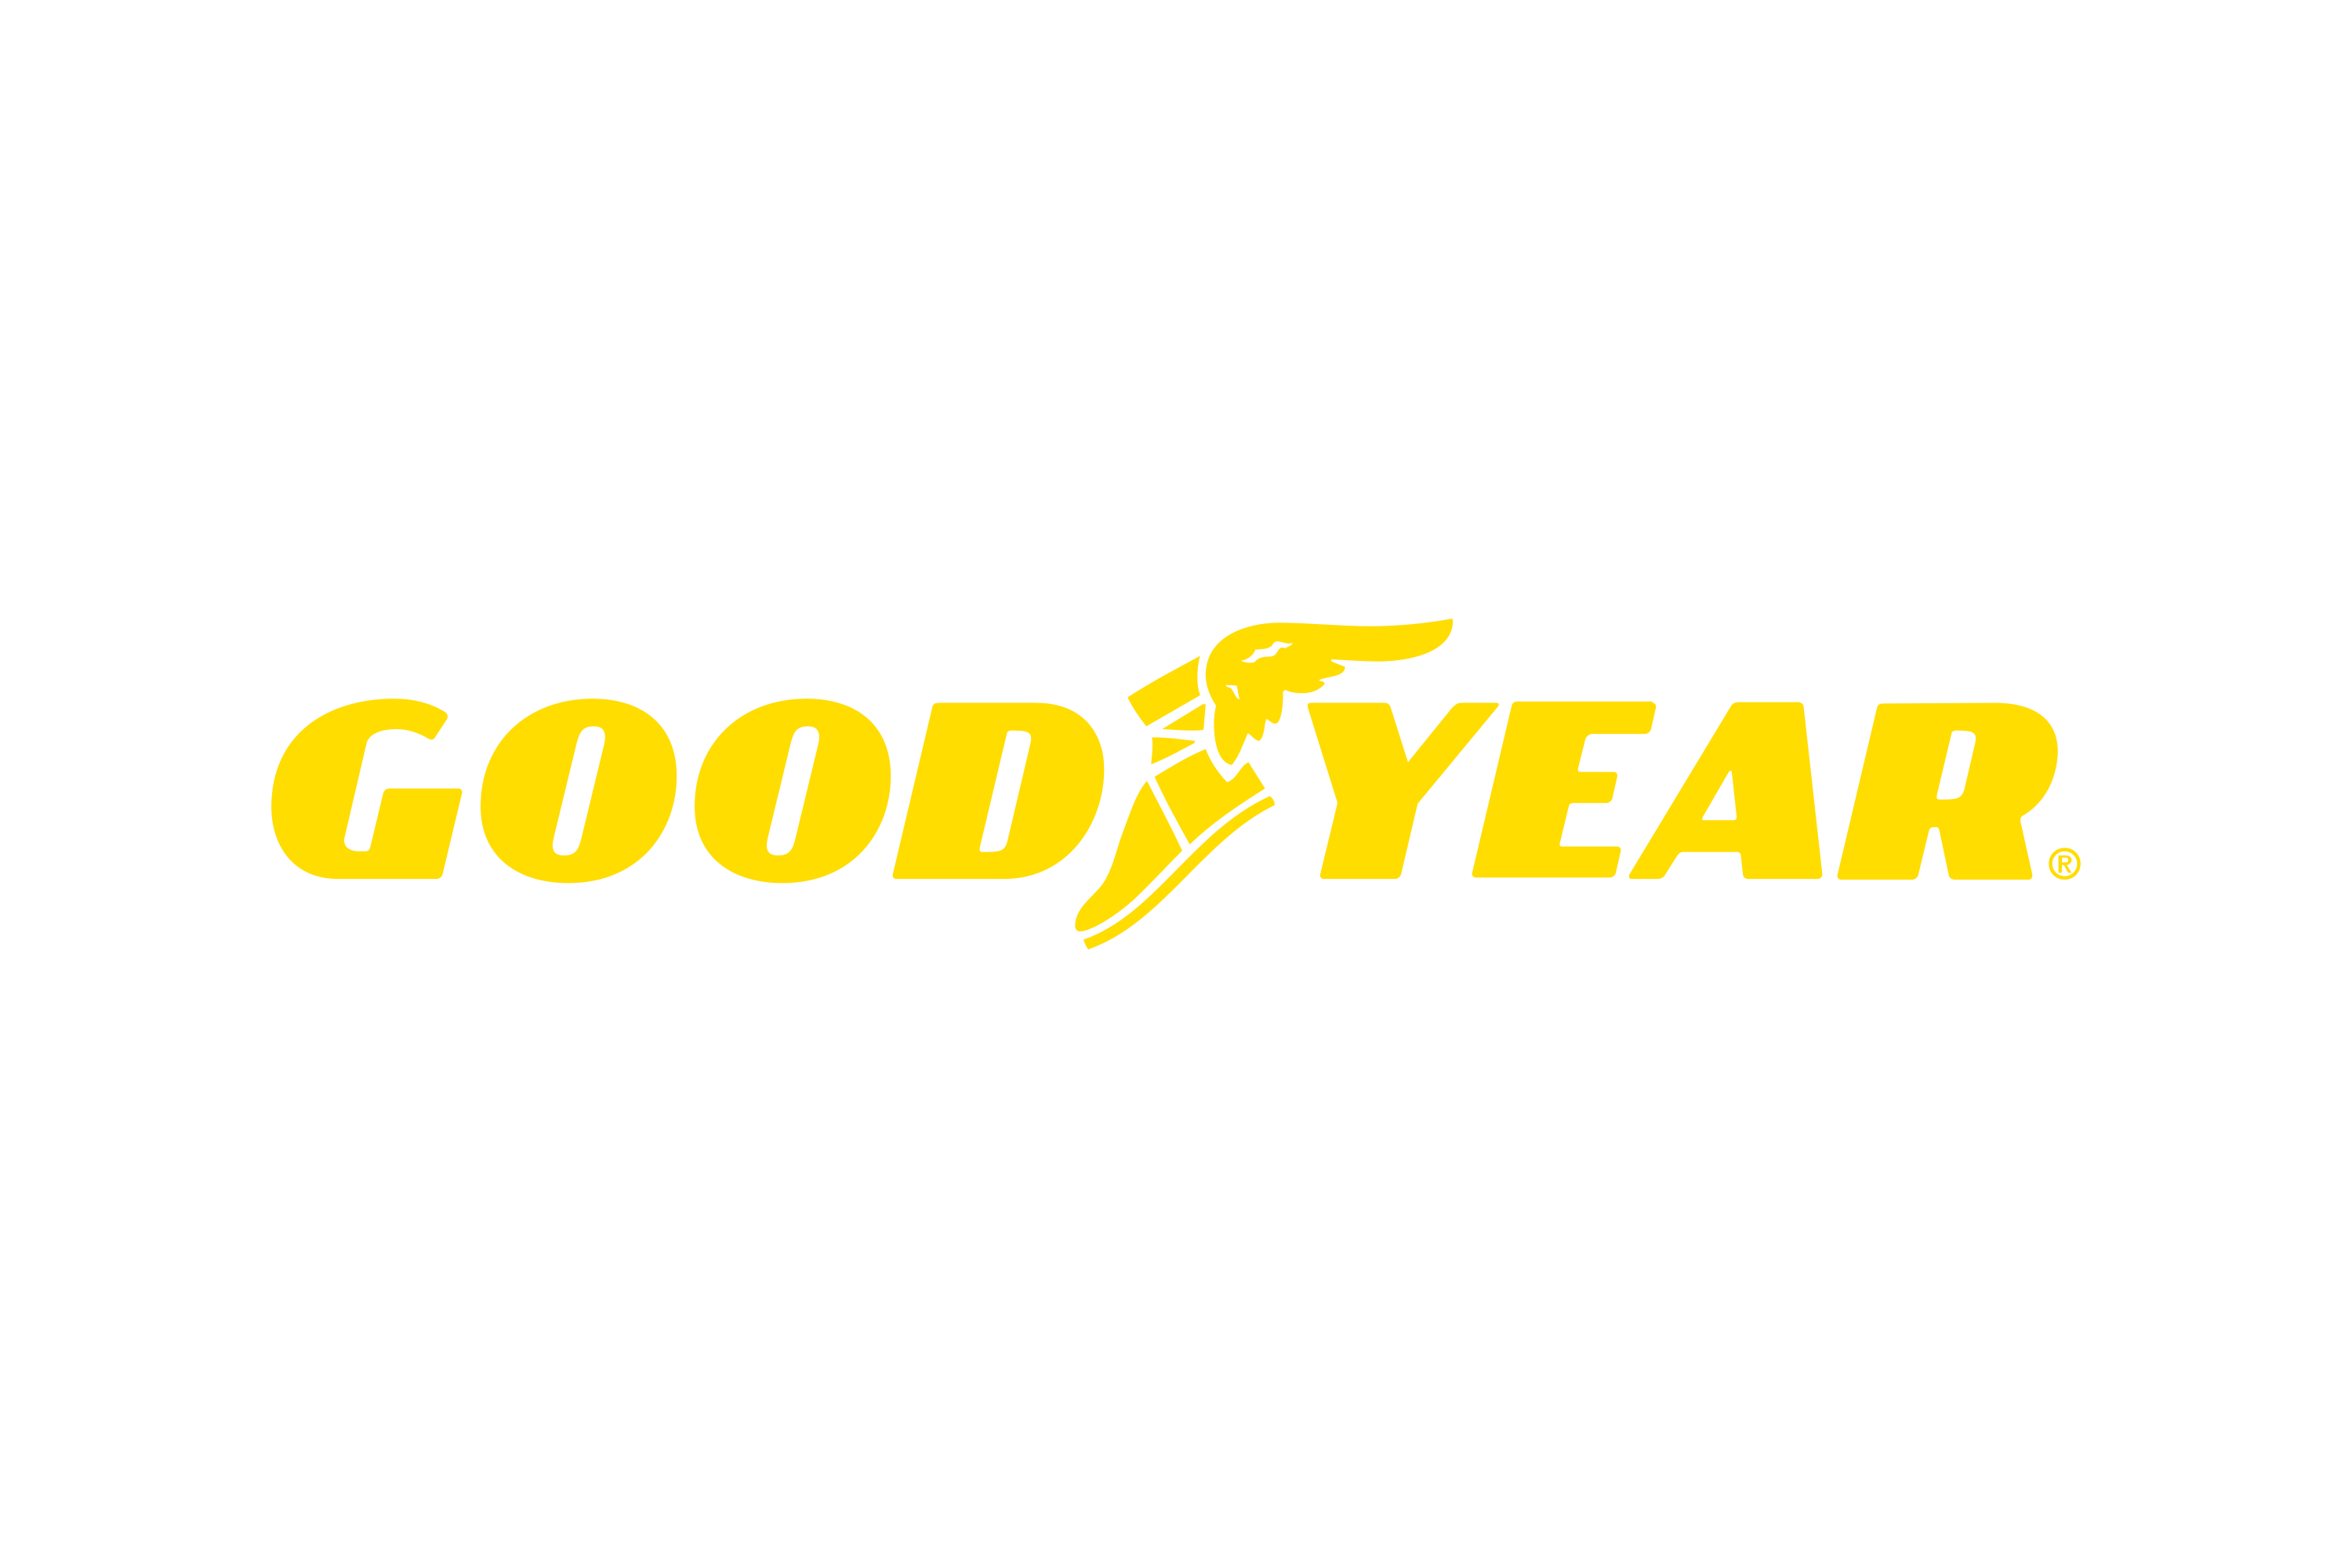 Download Goodyear Tire and Rubber Company Logo in SVG Vector or PNG